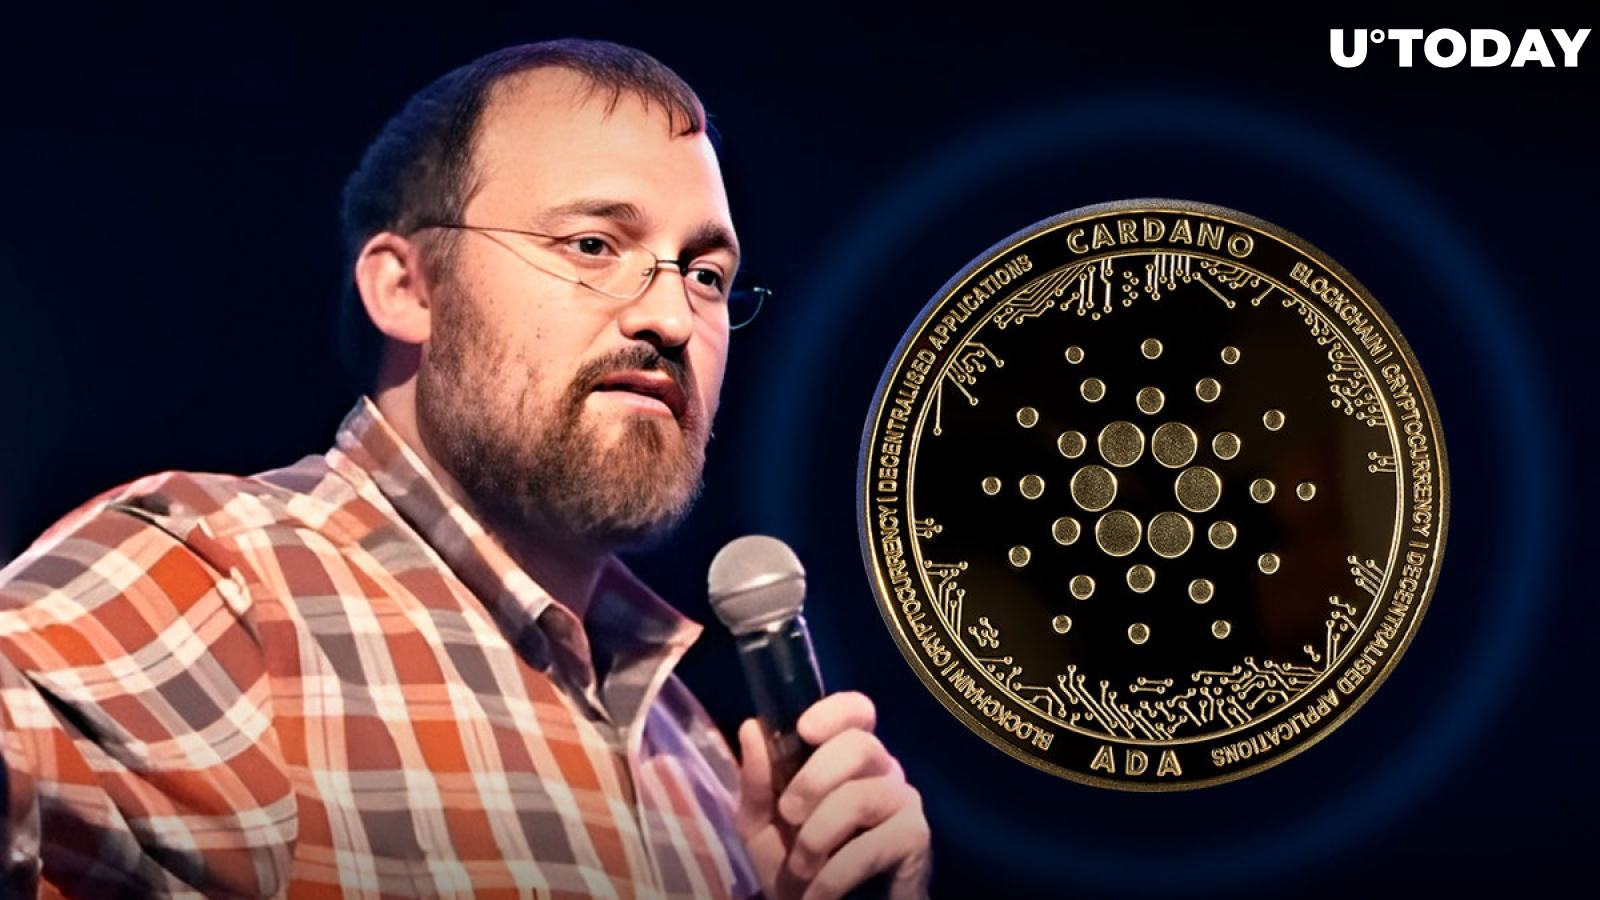 Cardano Founder on Scaling: ‘Things Could Move Very Fast’